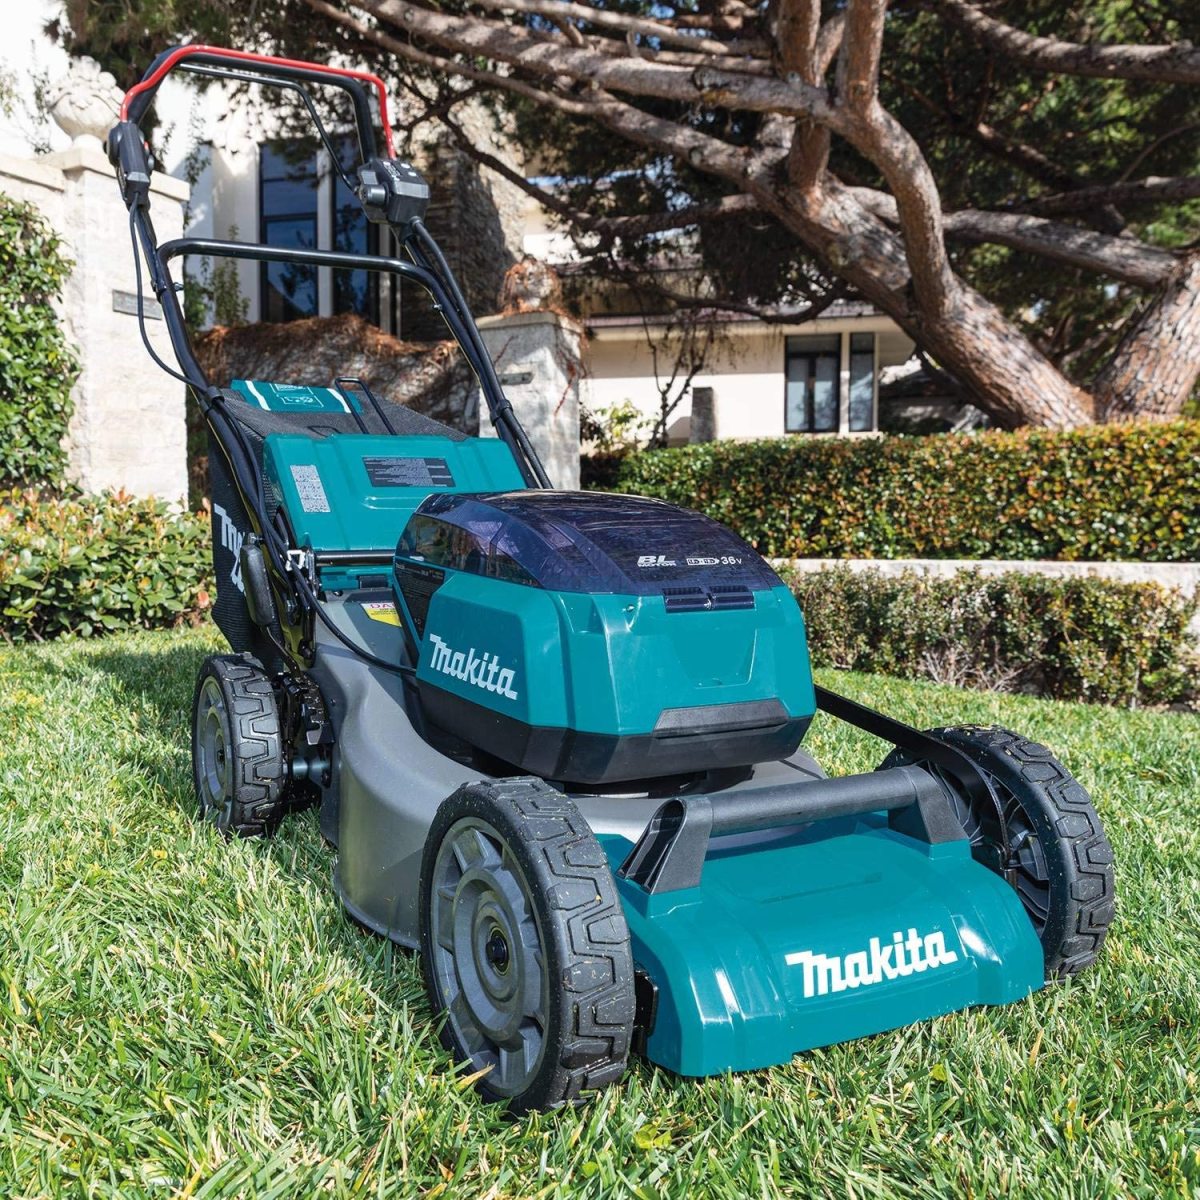 https://images.saymedia-content.com/.image/t_share/MTk2NjQ5NTM1MDE4MTE2OTI2/pros-and-cons-of-battery-powered-lawn-mowers.jpg